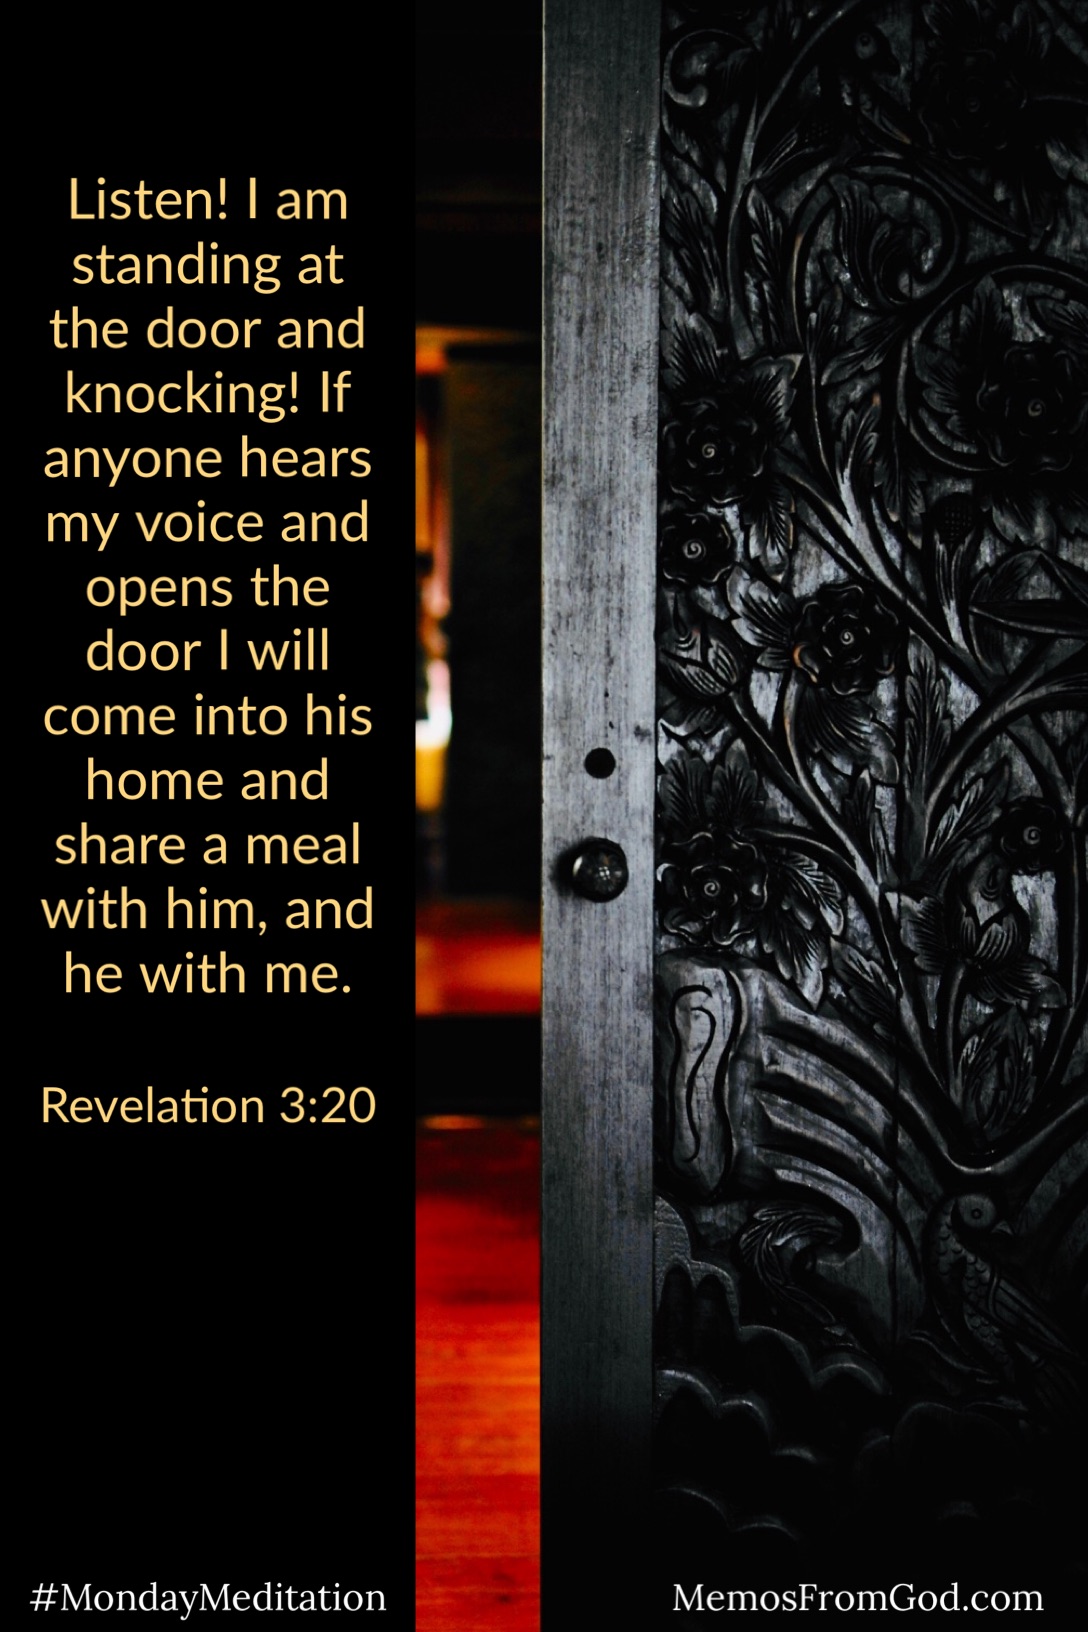 A large, carved, black door opening into a room glowing with light. Caption: Listen! I am standing at the door and knocking! If anyone hears my voice and opens the door I will come into his home and share a meal with him, and he with me. Revelation 3:20